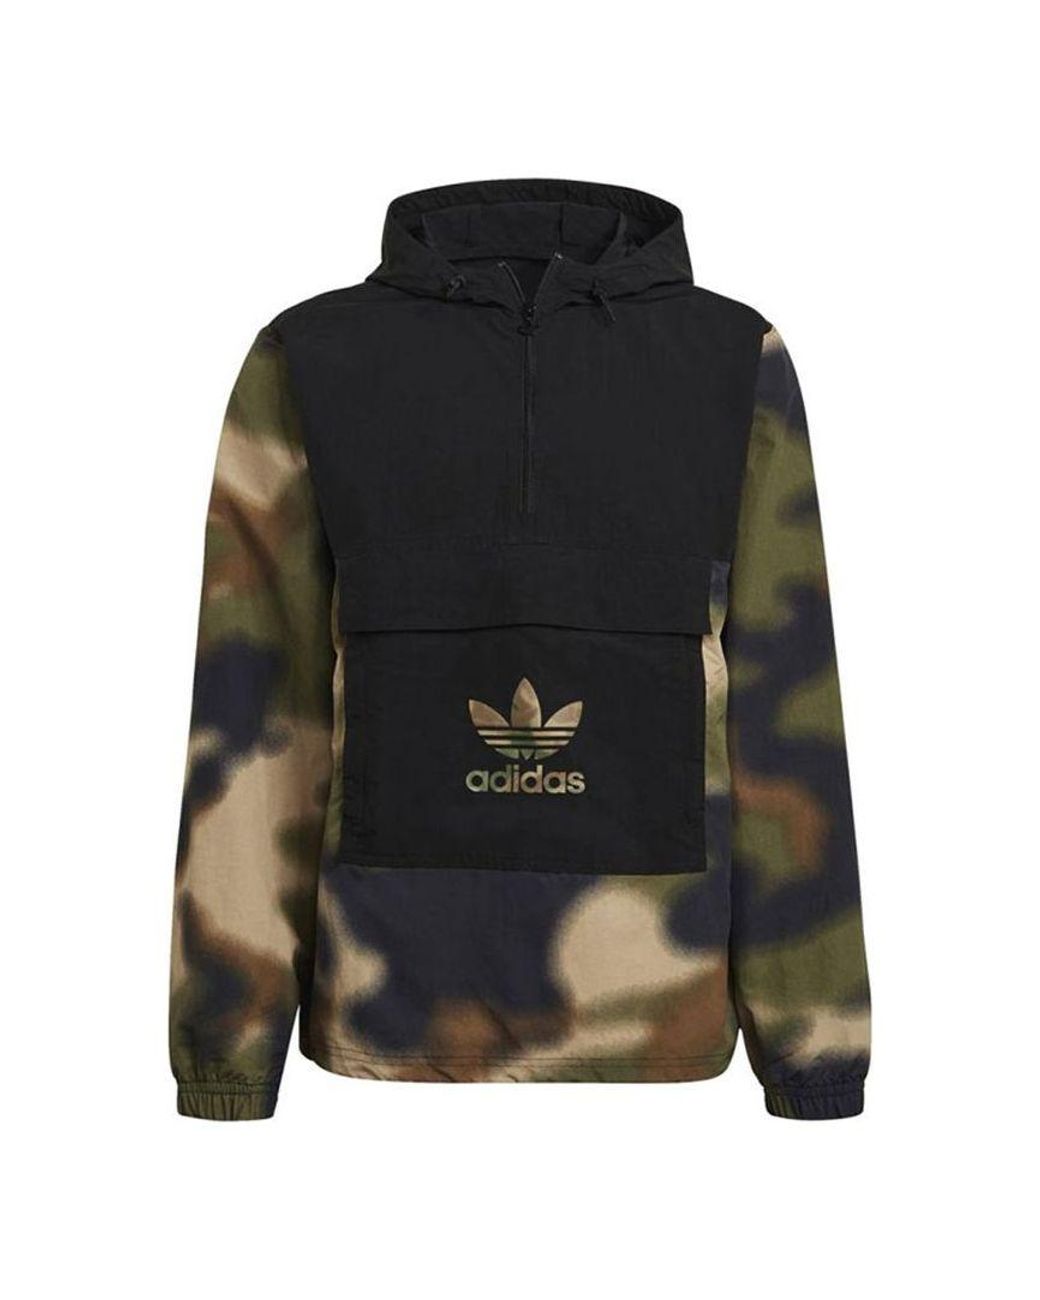 adidas Adida Origina Haf Zipper Puover Hooded Caoufage Printing Jacket  Green in Black for Men | Lyst